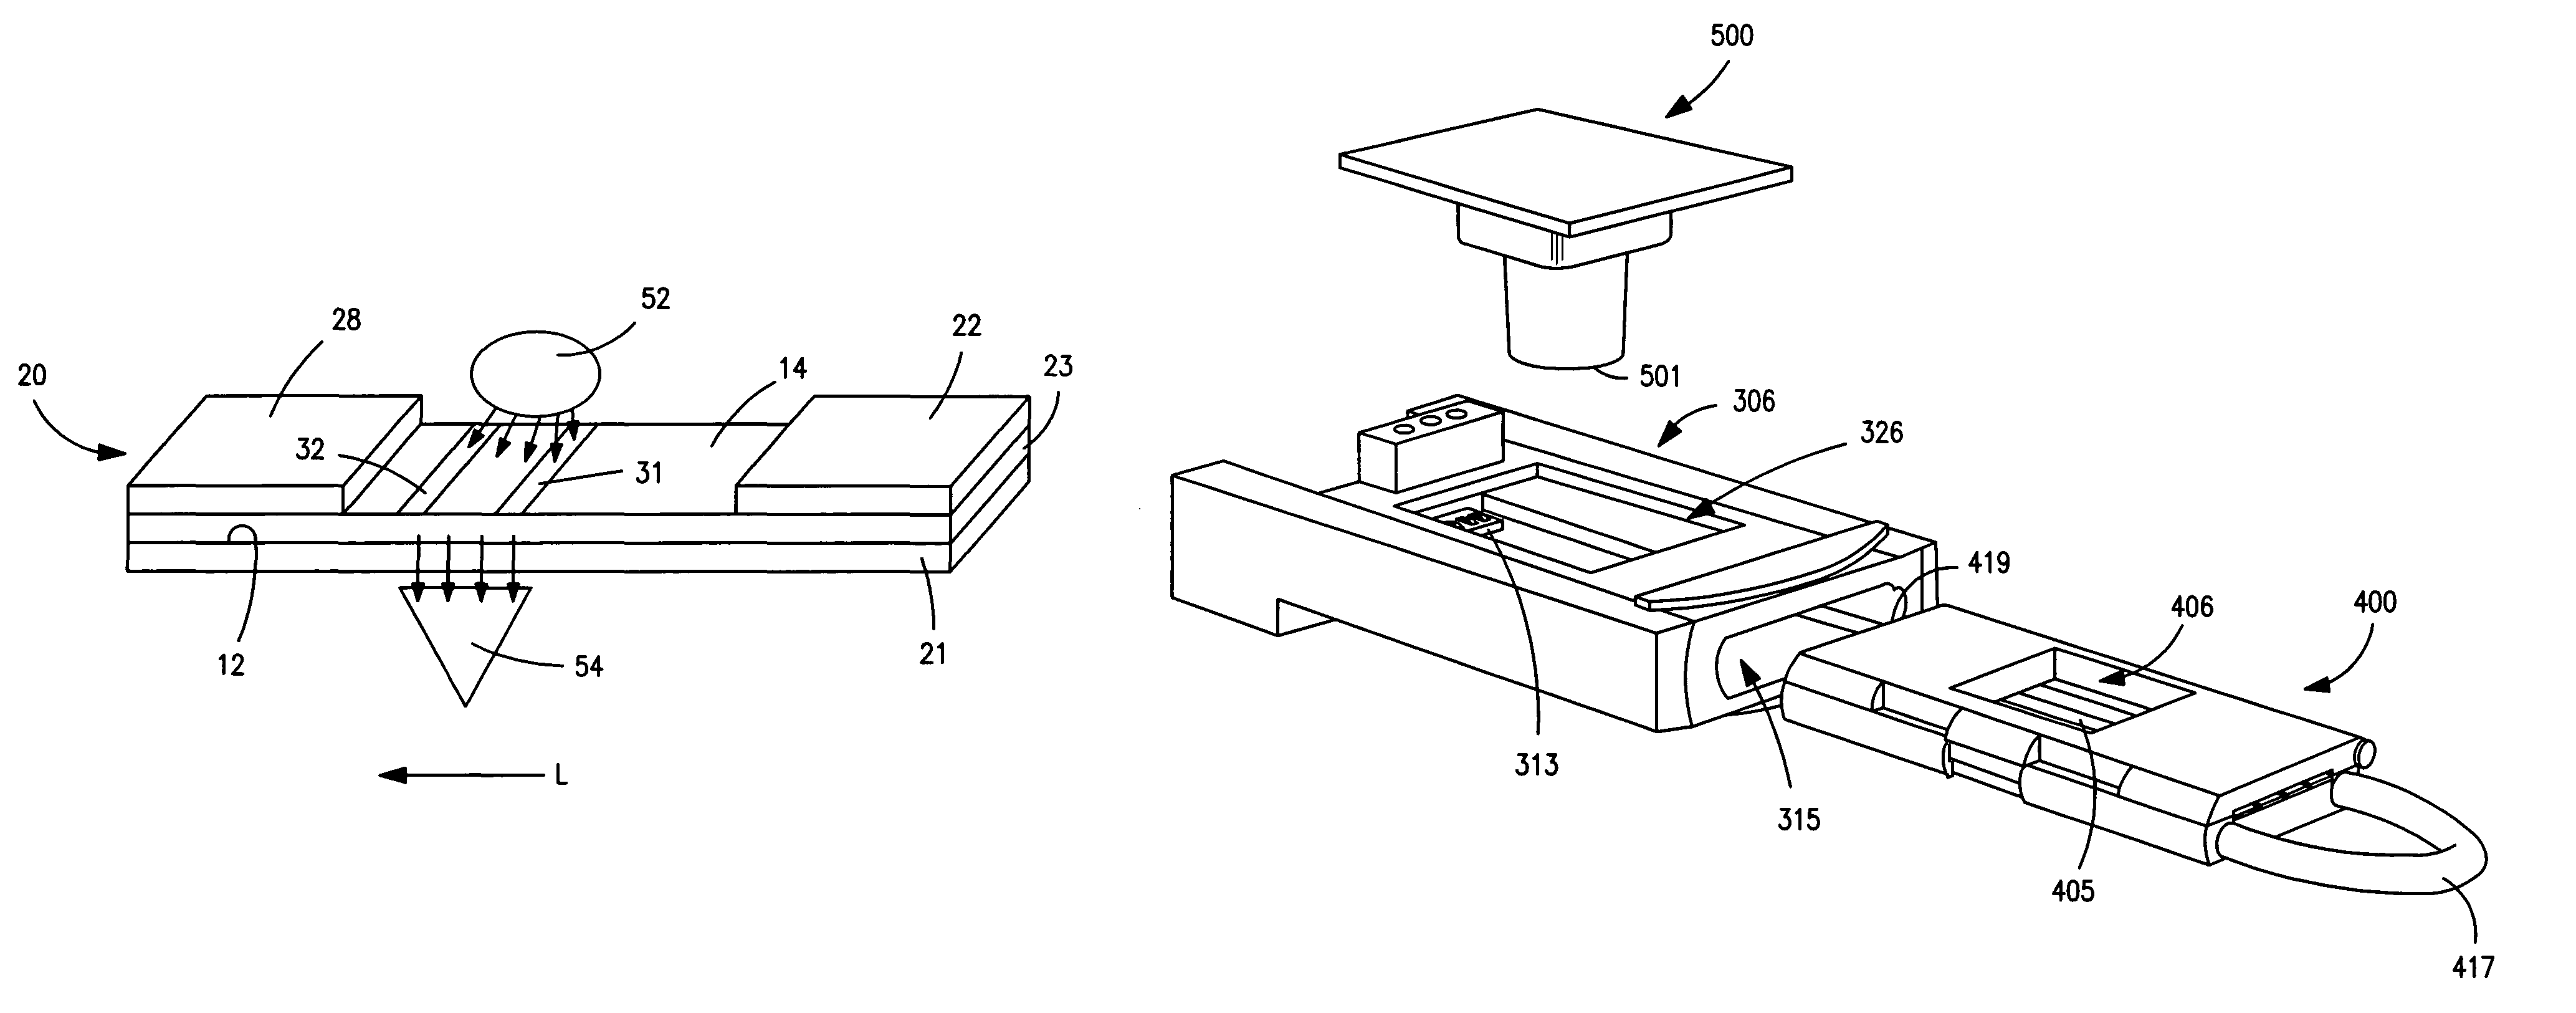 Optical detection system using electromagnetic radiation to detect presence or quantity of analyte